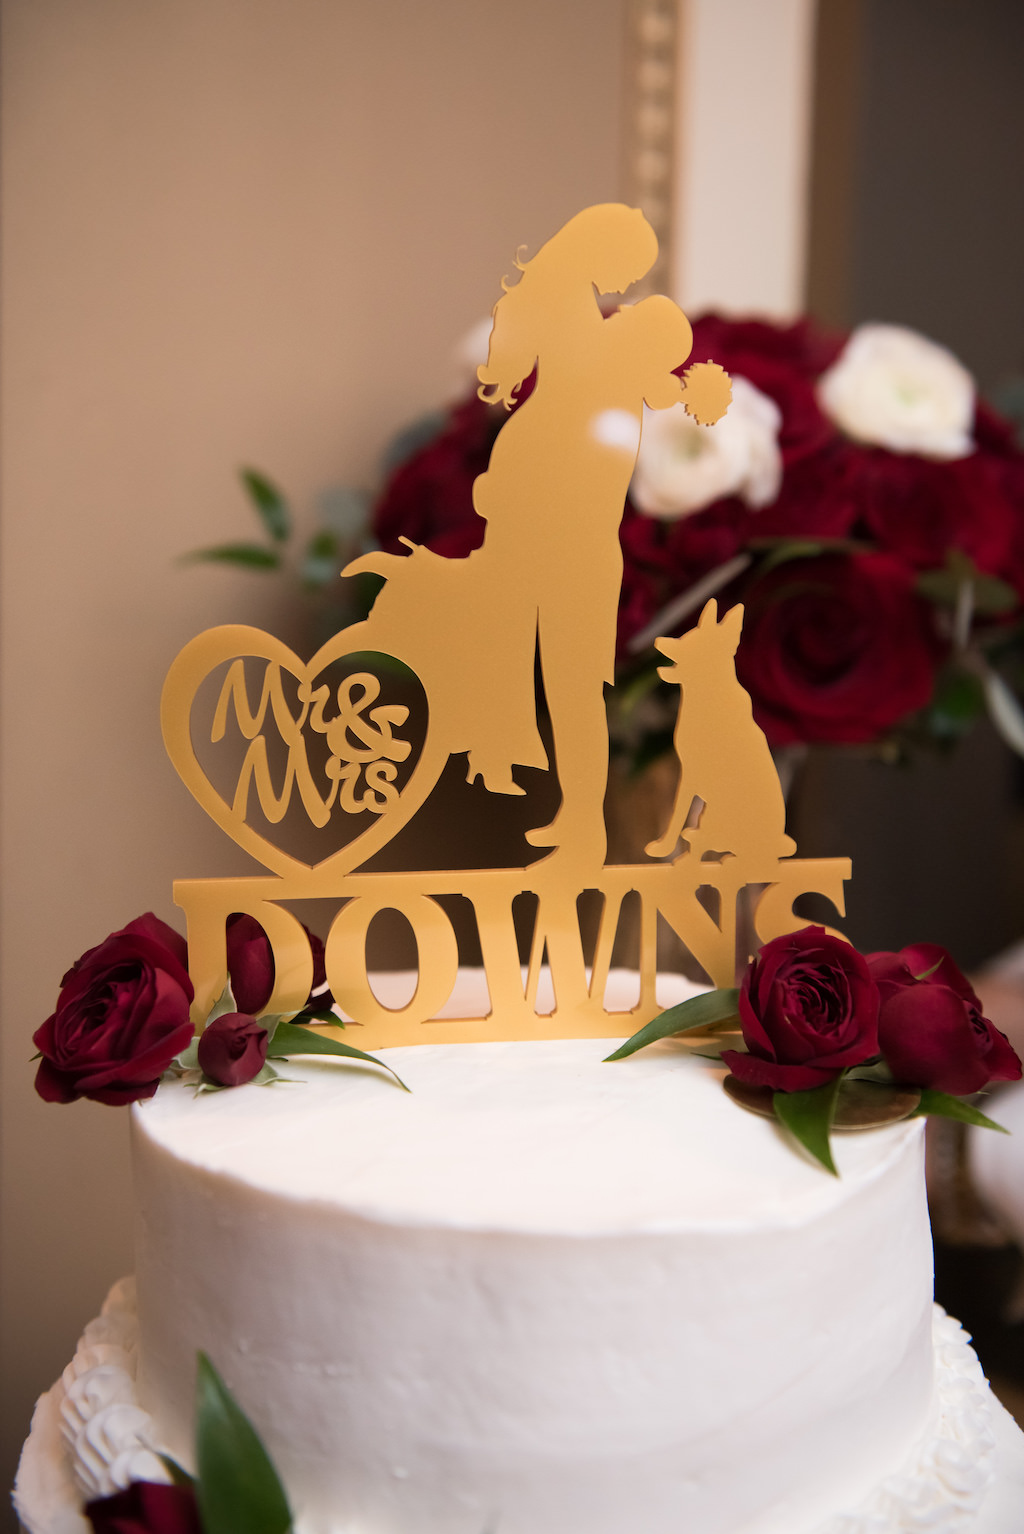 Gold and Burgundy Wedding Two tier round white Wedding Cake with Custom Silhouette Bride and Groom and Dog Cake Topper with Red Roses